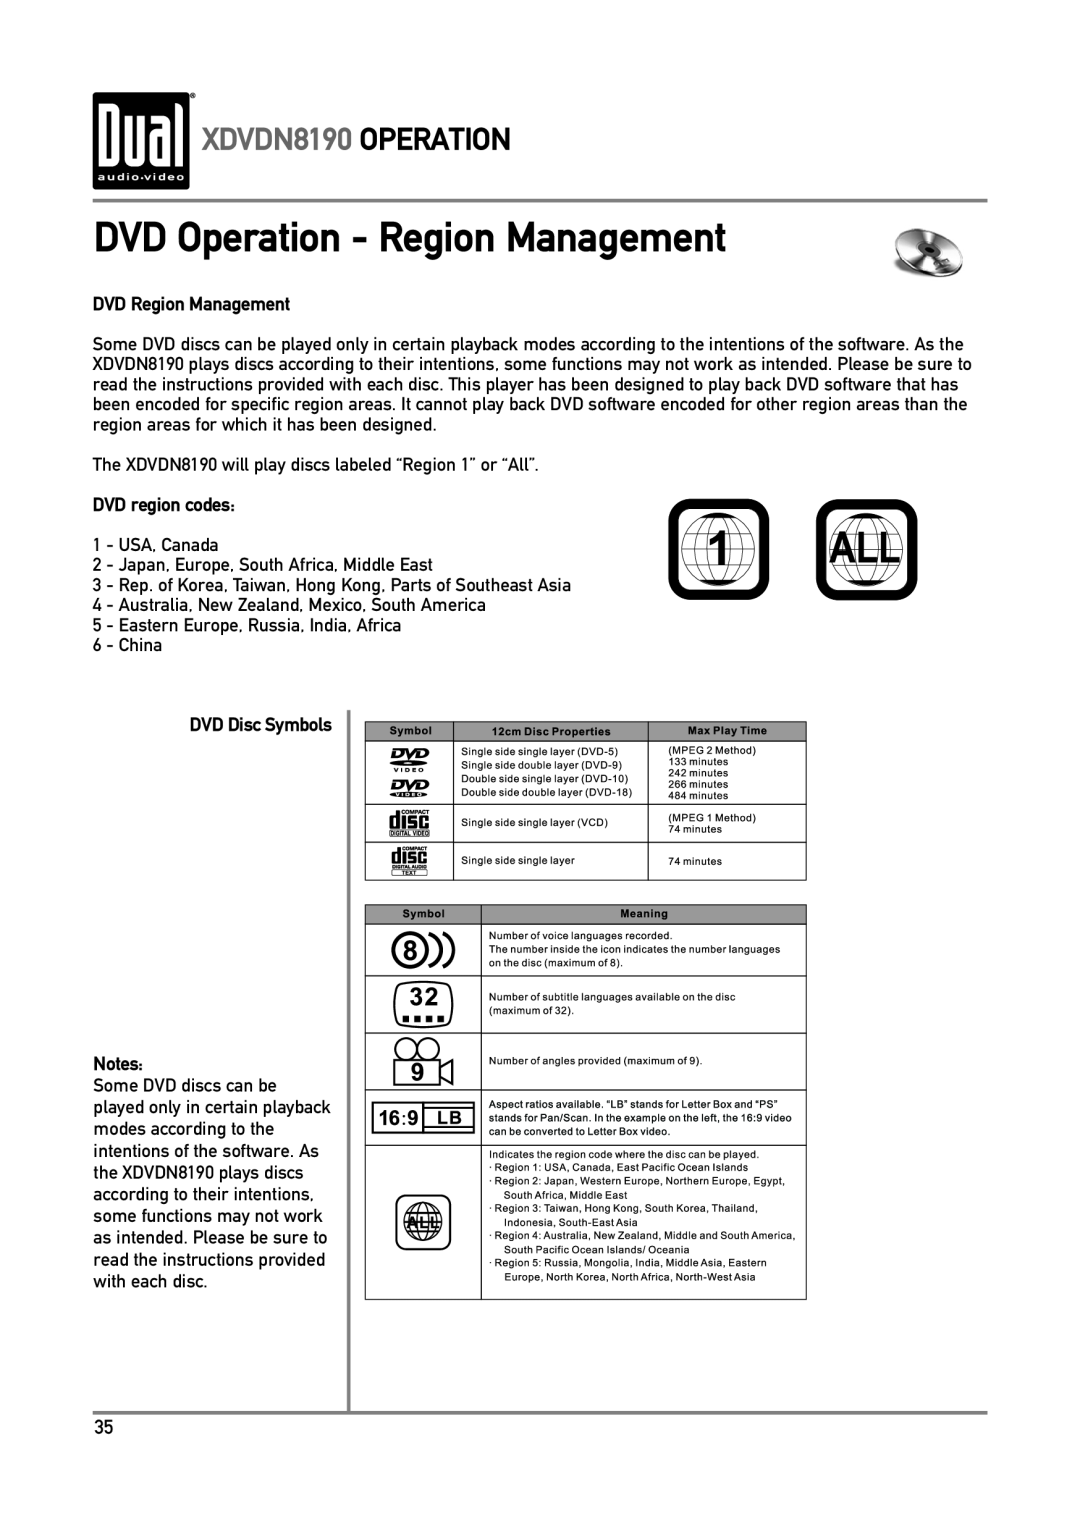 Dual owner manual DVD Operation - Region Management, XDVDN8190 OPERATION, DVD Region Management, DVD region codes 